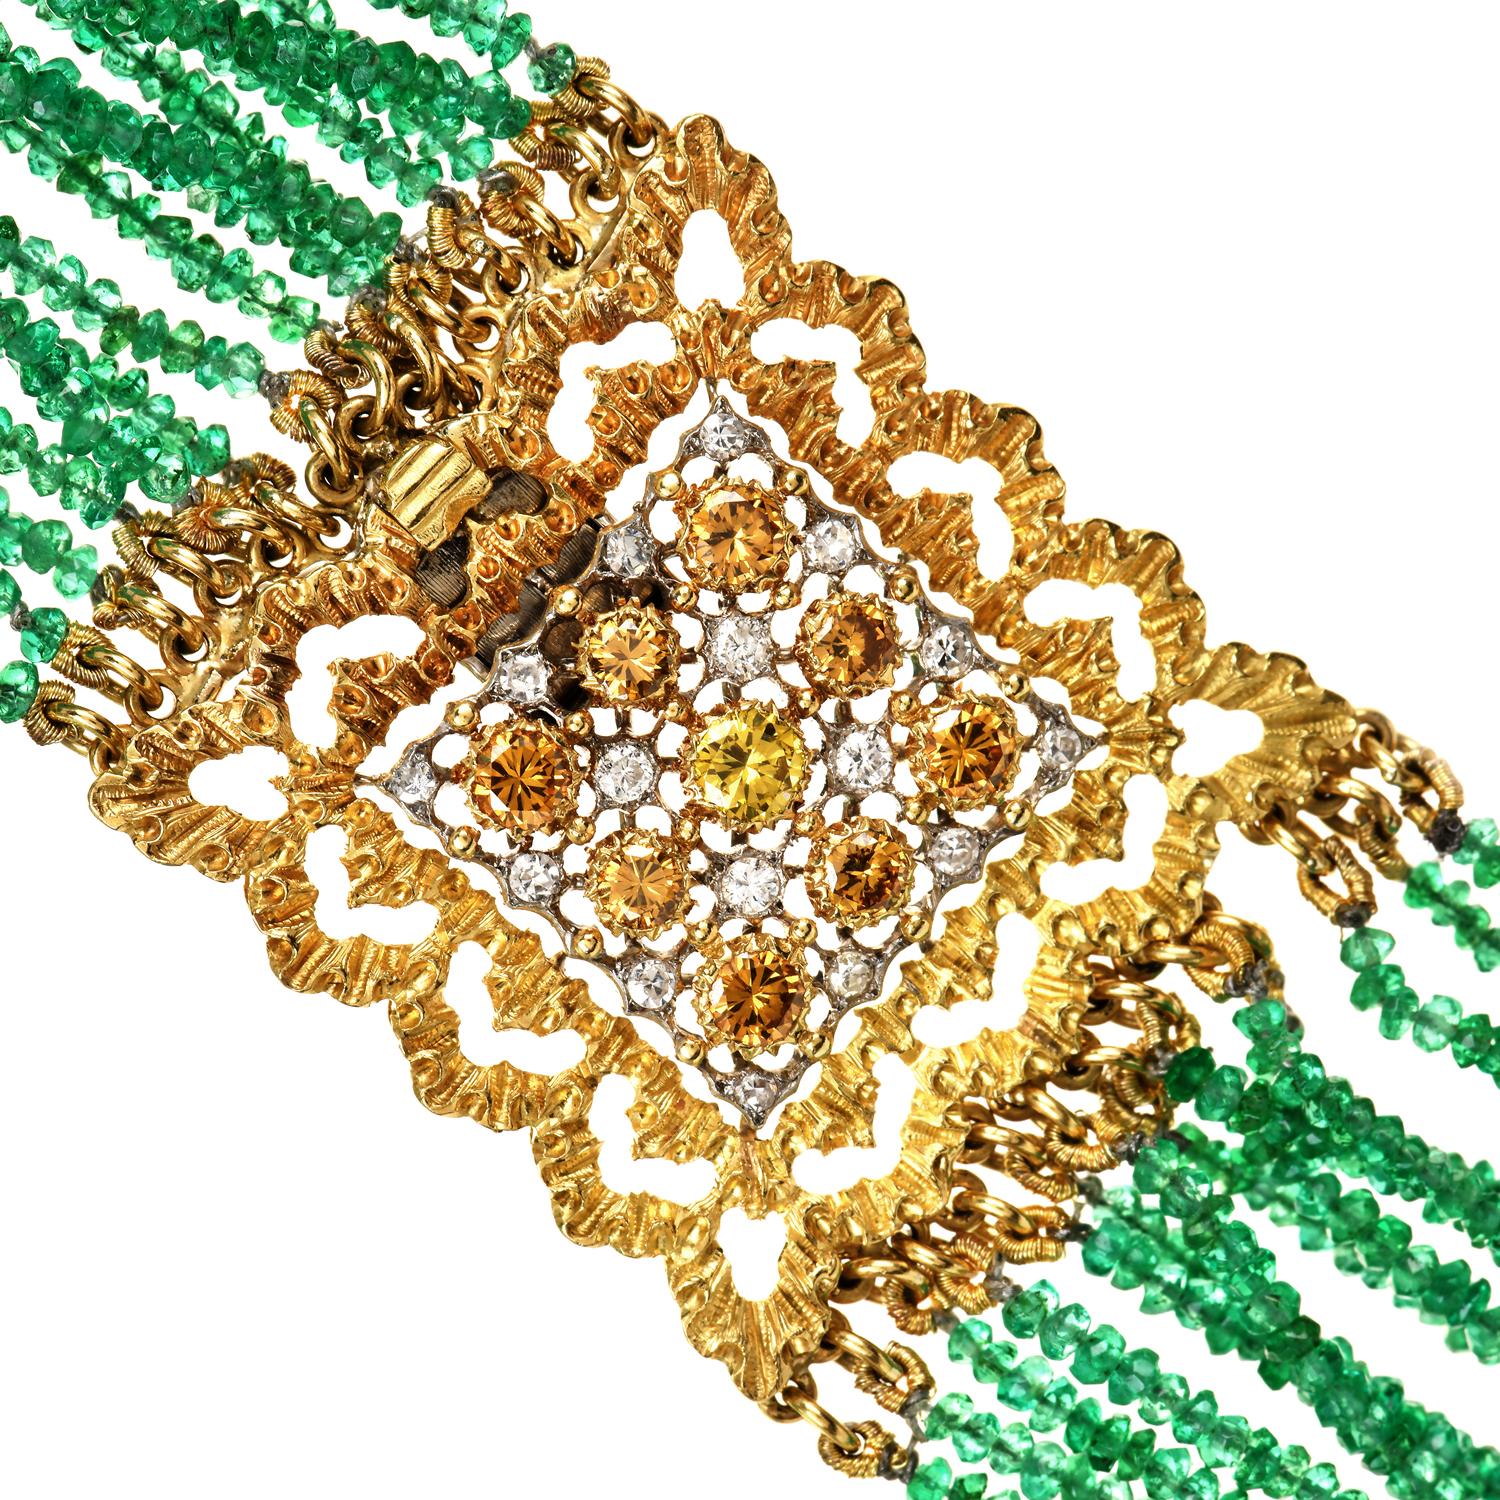 A magnificent Buccelatti multistrand remarkable necklace.

This beautiful beaded necklace has a Vivid green color displayed from Genuine Emeralds, 15 strands, 2mm width each, with a beaded design in different lengths holding collectively